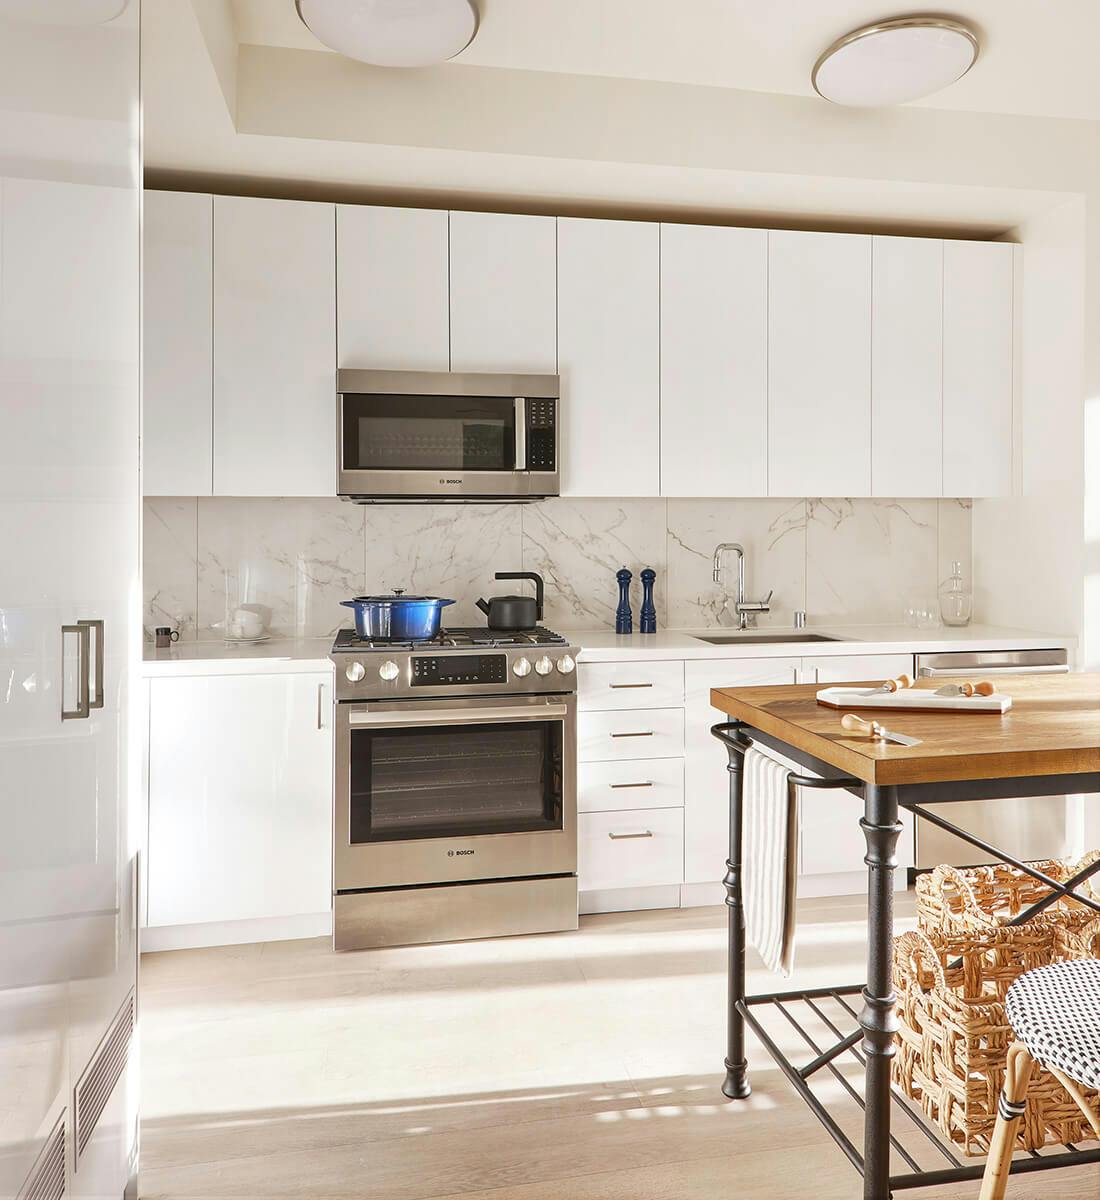 The kitchens in OneEleven SF all contain a stainless steel sink and appliances (including a refrigerator, gas range, microwave, and dishwasher), as well as quartz countertops, porcelain tile backsplash, and under cabinet LED lighting.